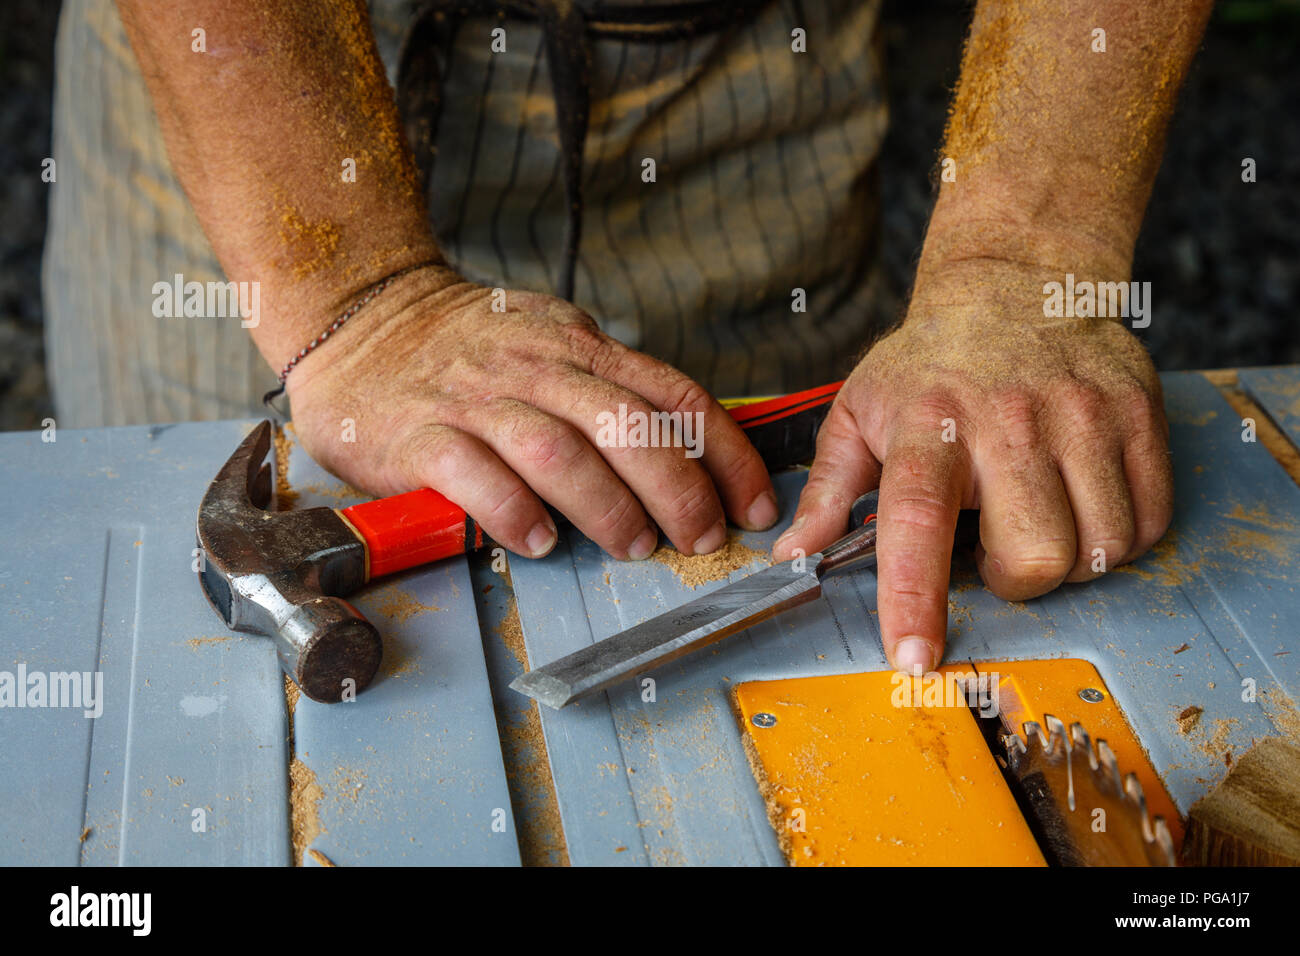 Man's hands covered in saw dust with hammer and a chisel on a table saw . Carpentry tools, concept of wood work. Stock Photo